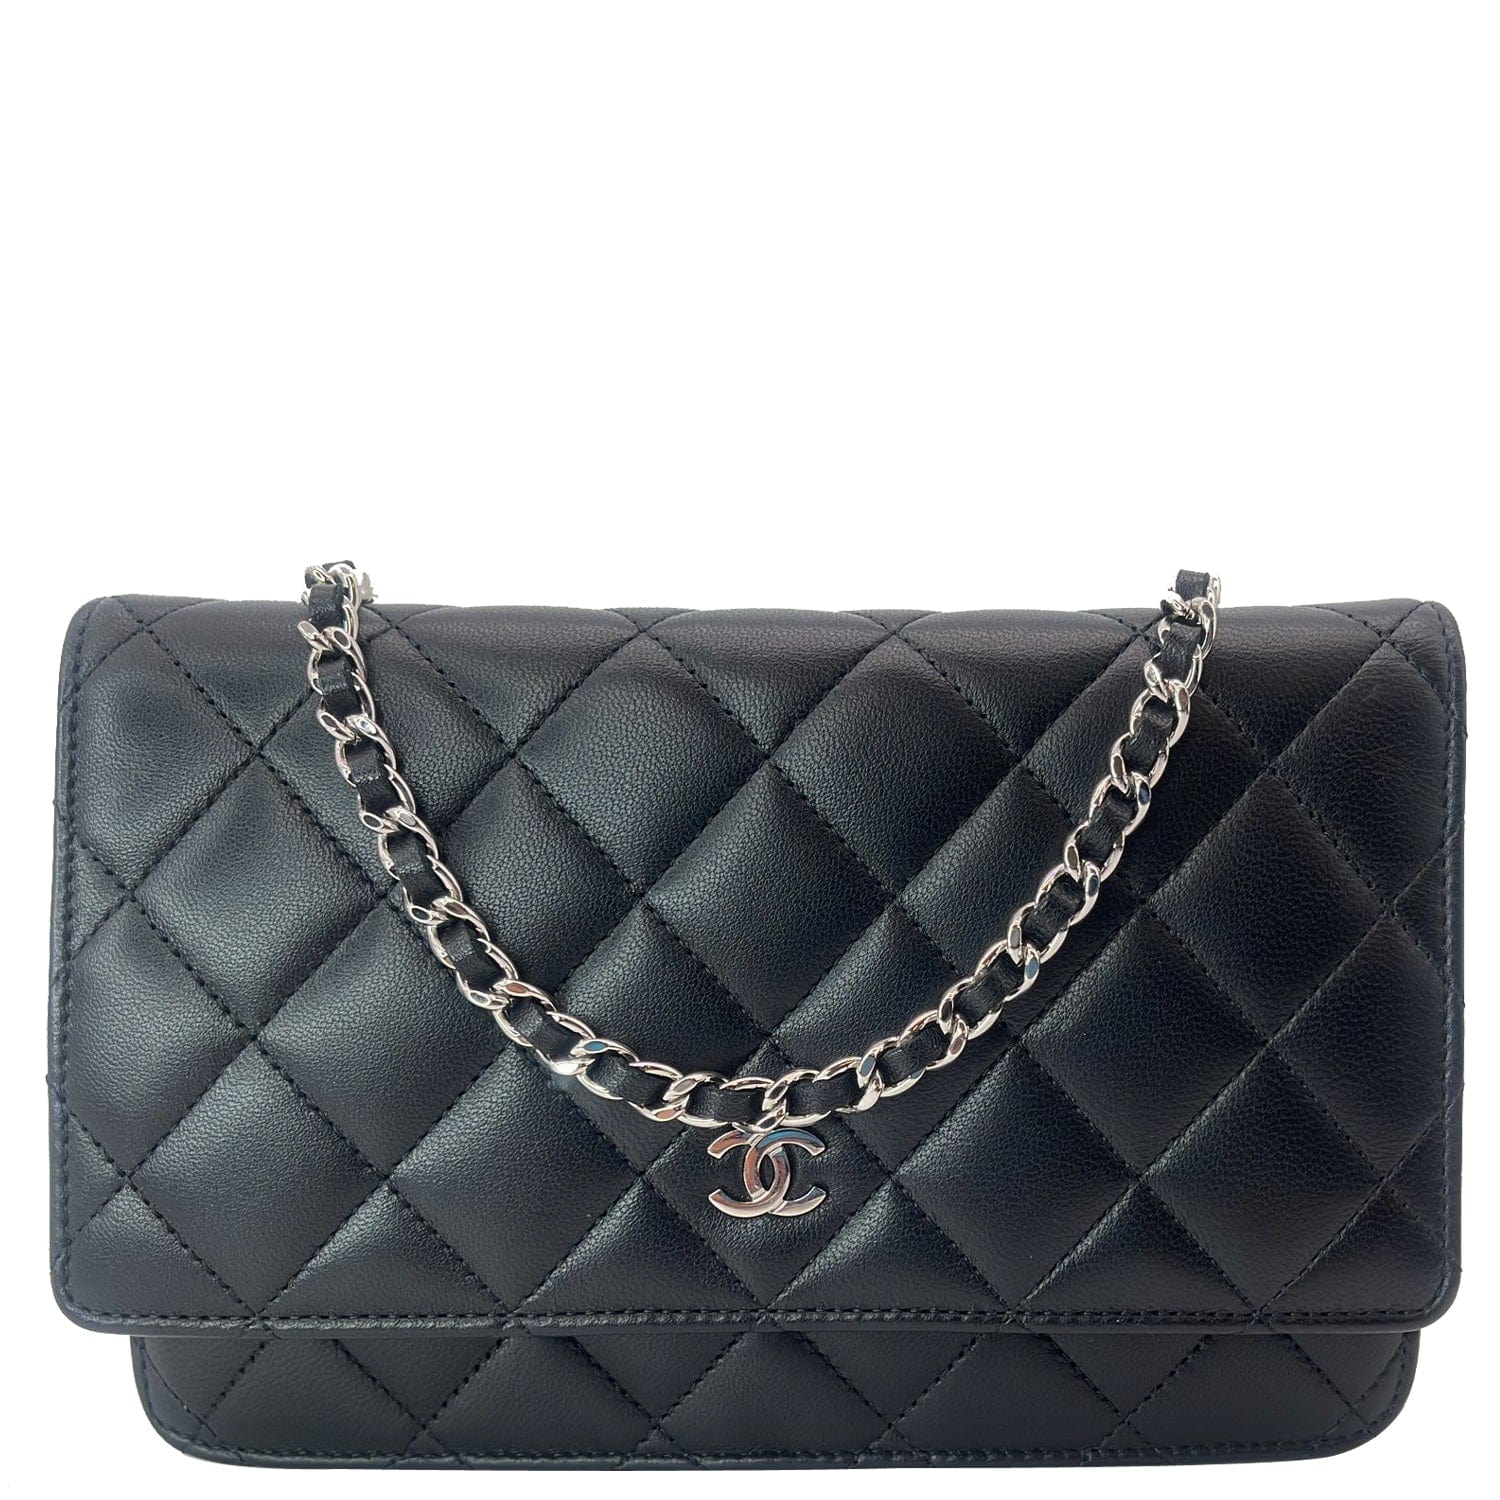 Chanel Classic Quilted Caviar Leather WOC Wallet Crossbody Bag